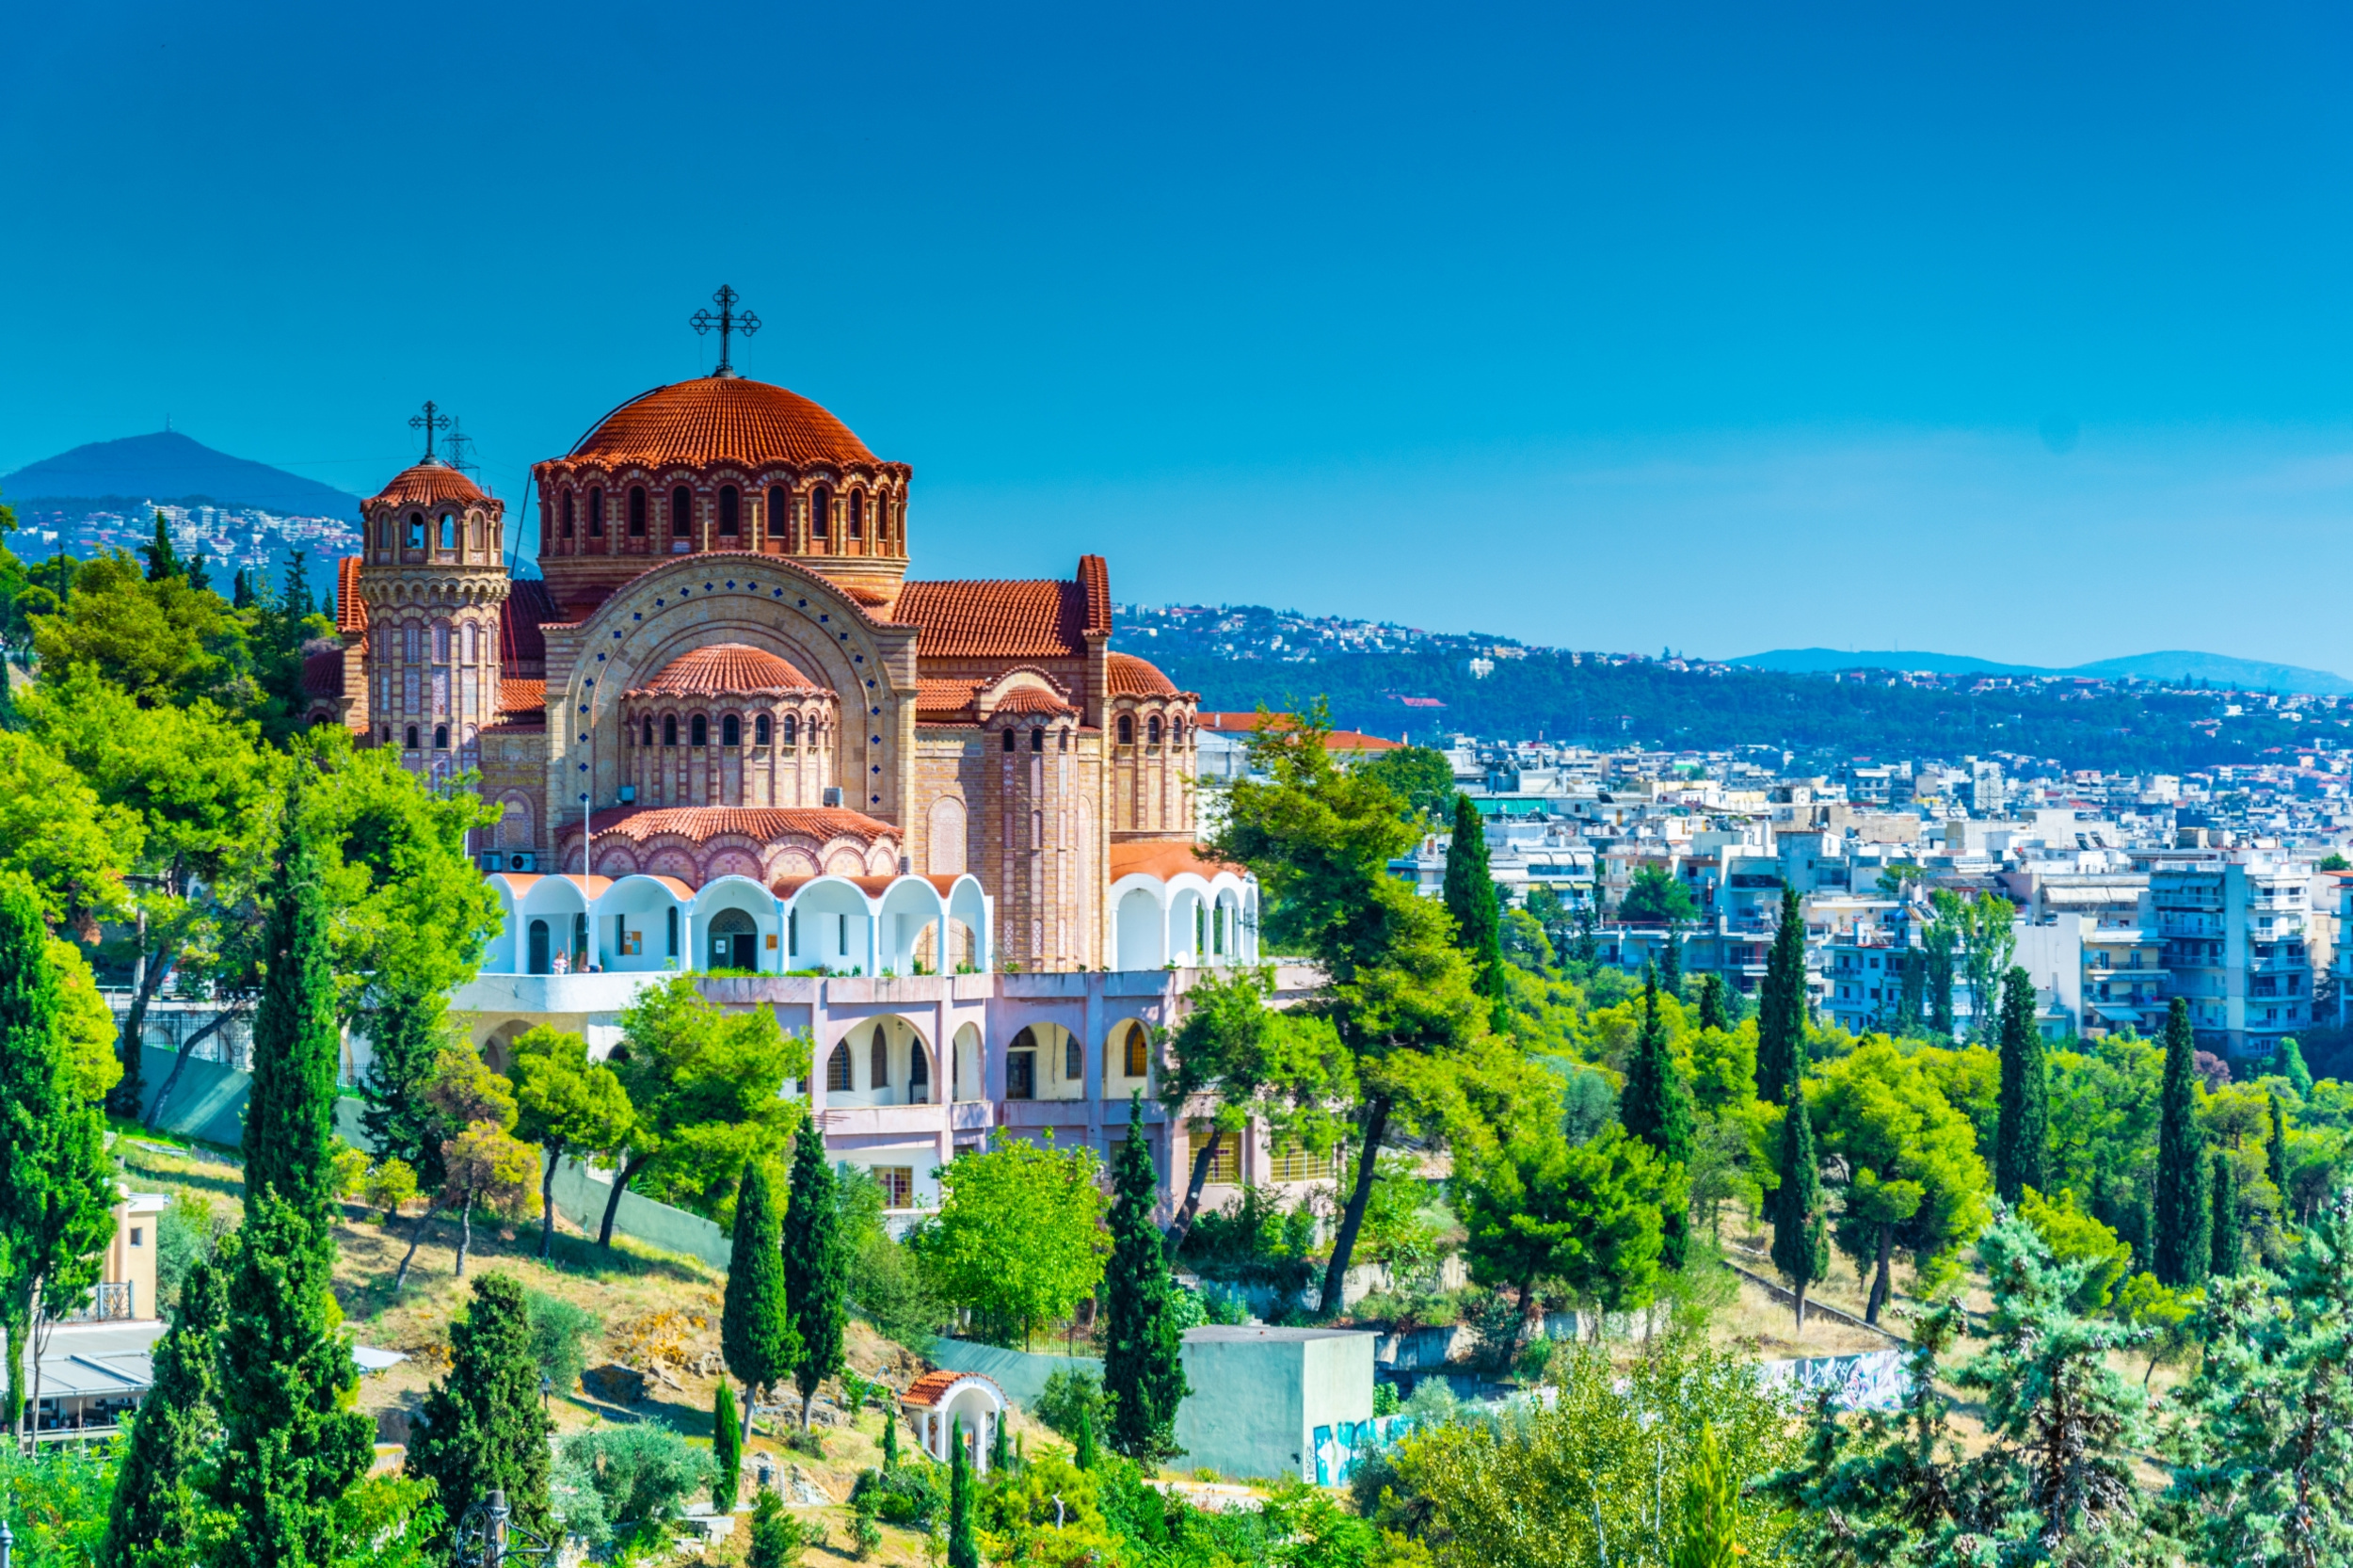 <p>You’ll find plenty of feta in this northern Greek city. But other varieties are produced here, such as <span>graviera or pichtogalo, a spreadable white cheese.</span></p><p><a href='https://www.msn.com/en-us/community/channel/vid-cj9pqbr0vn9in2b6ddcd8sfgpfq6x6utp44fssrv6mc2gtybw0us'>Follow us on MSN to see more of our exclusive lifestyle content.</a></p>